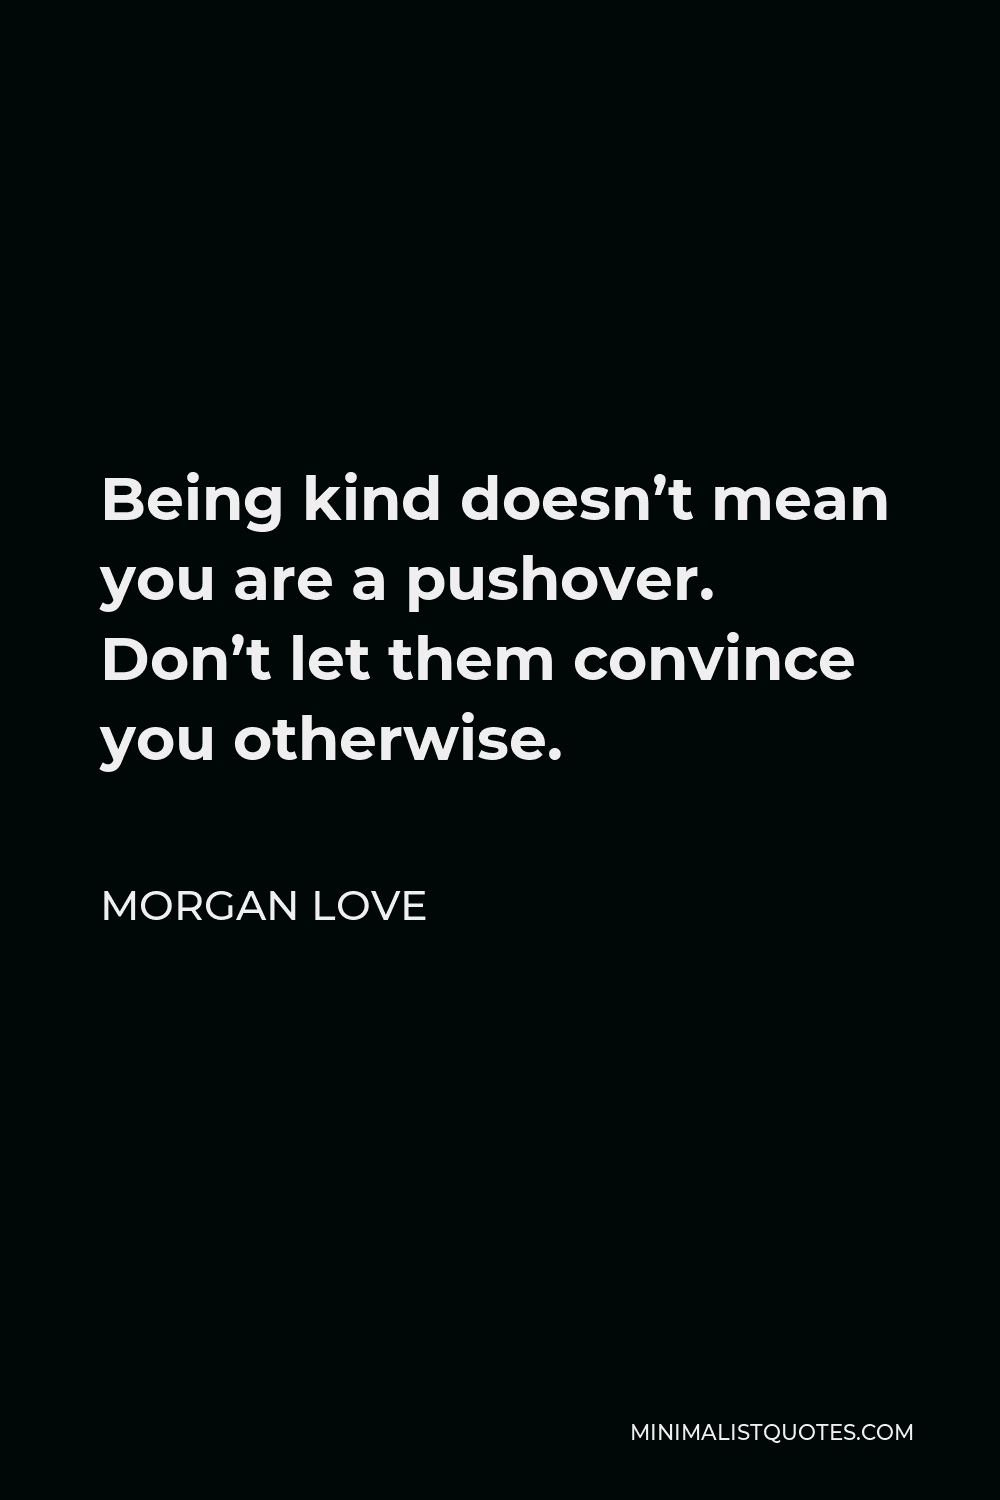 Morgan Love Quote - Being kind doesn’t mean you are a pushover. Don’t let them convince you otherwise.